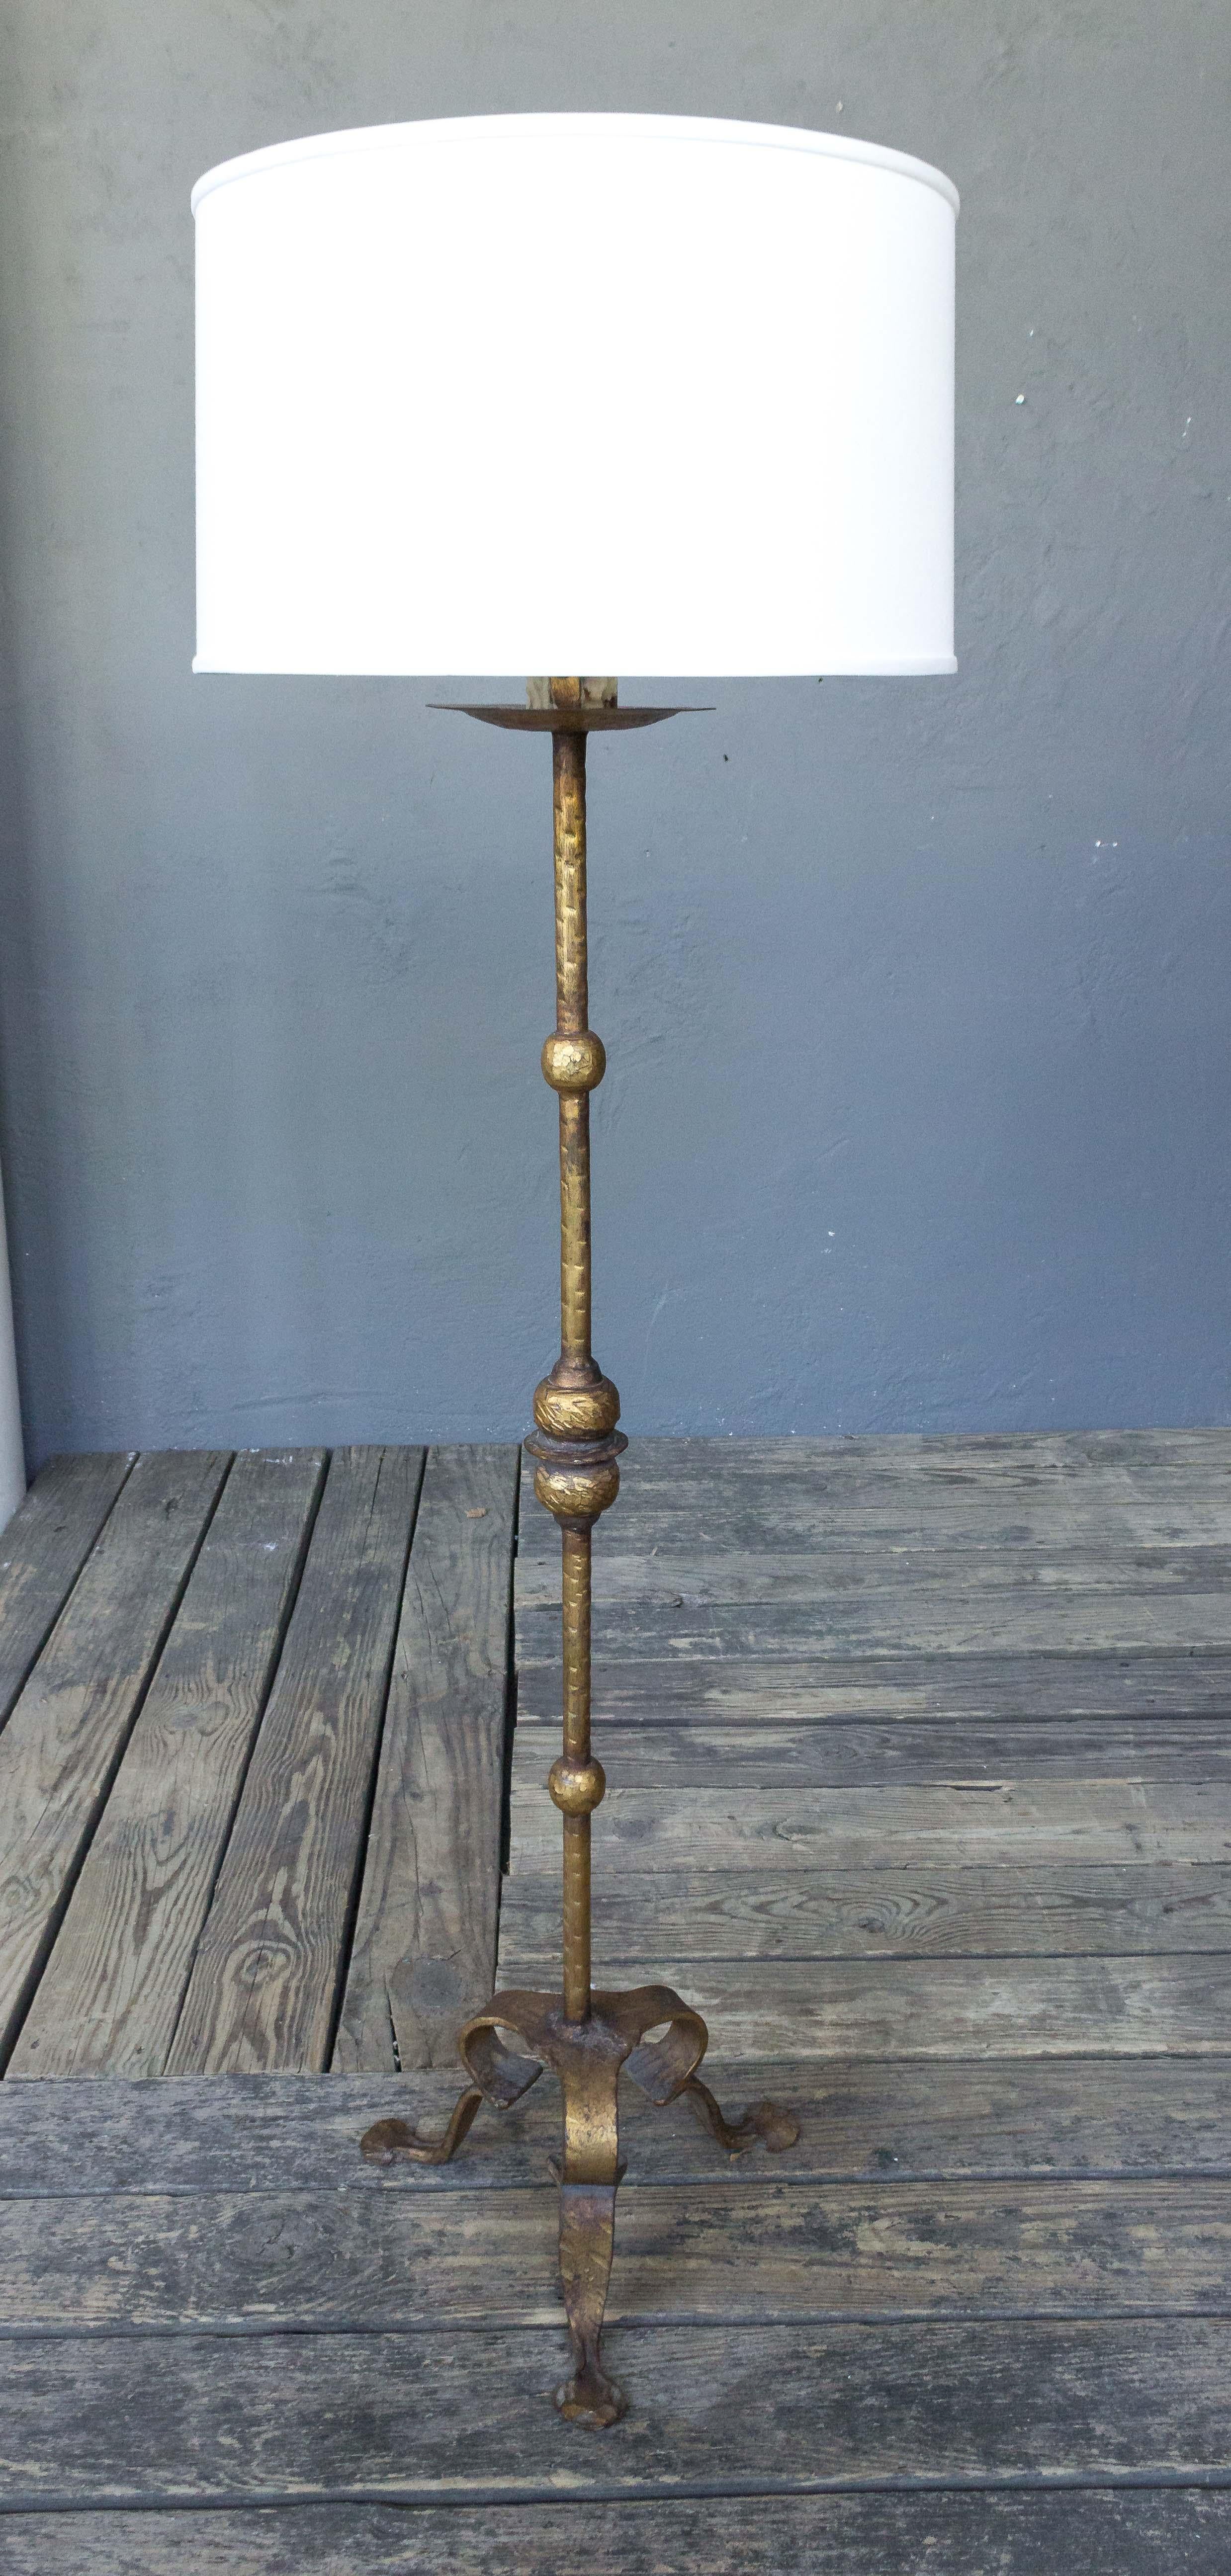 Presenting an extraordinary Spanish gilt wrought iron floor lamp of remarkable quality. This lamp, in very good vintage condition, stands at a height of 55 inches with an 18 inch diameter base. Please note that it has not been rewired, but a wiring